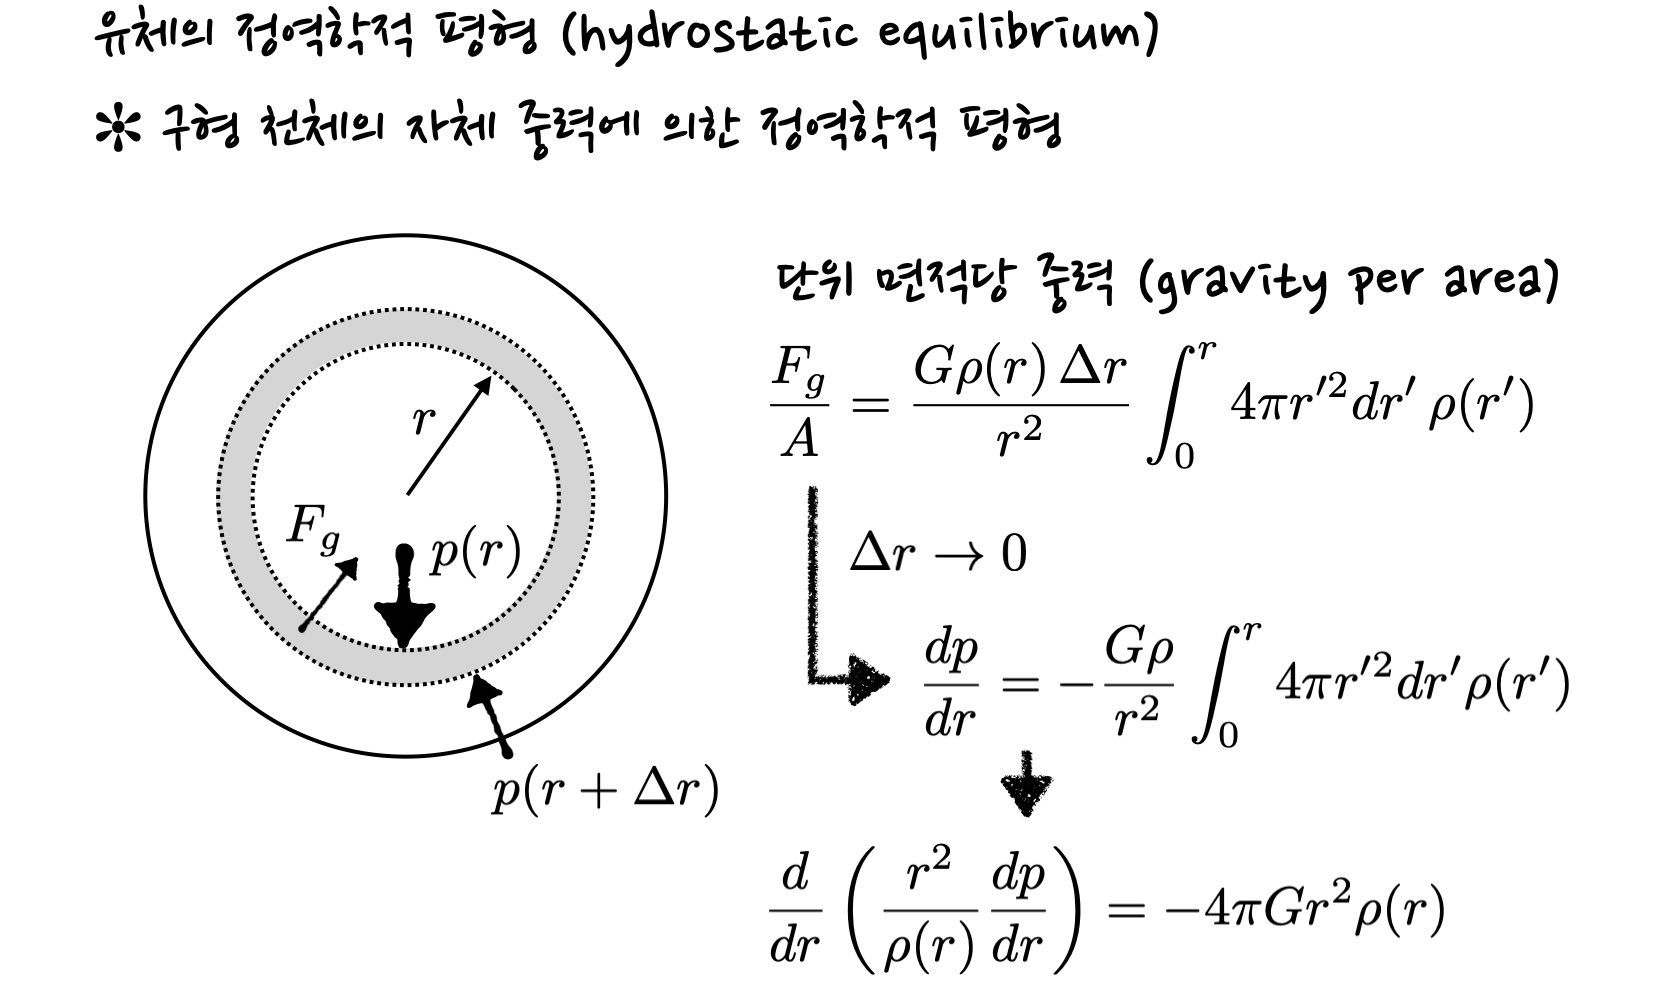 schematics of hydrostatic equilibrium&#44; given by gravitational force of a spherical object filled with fluid